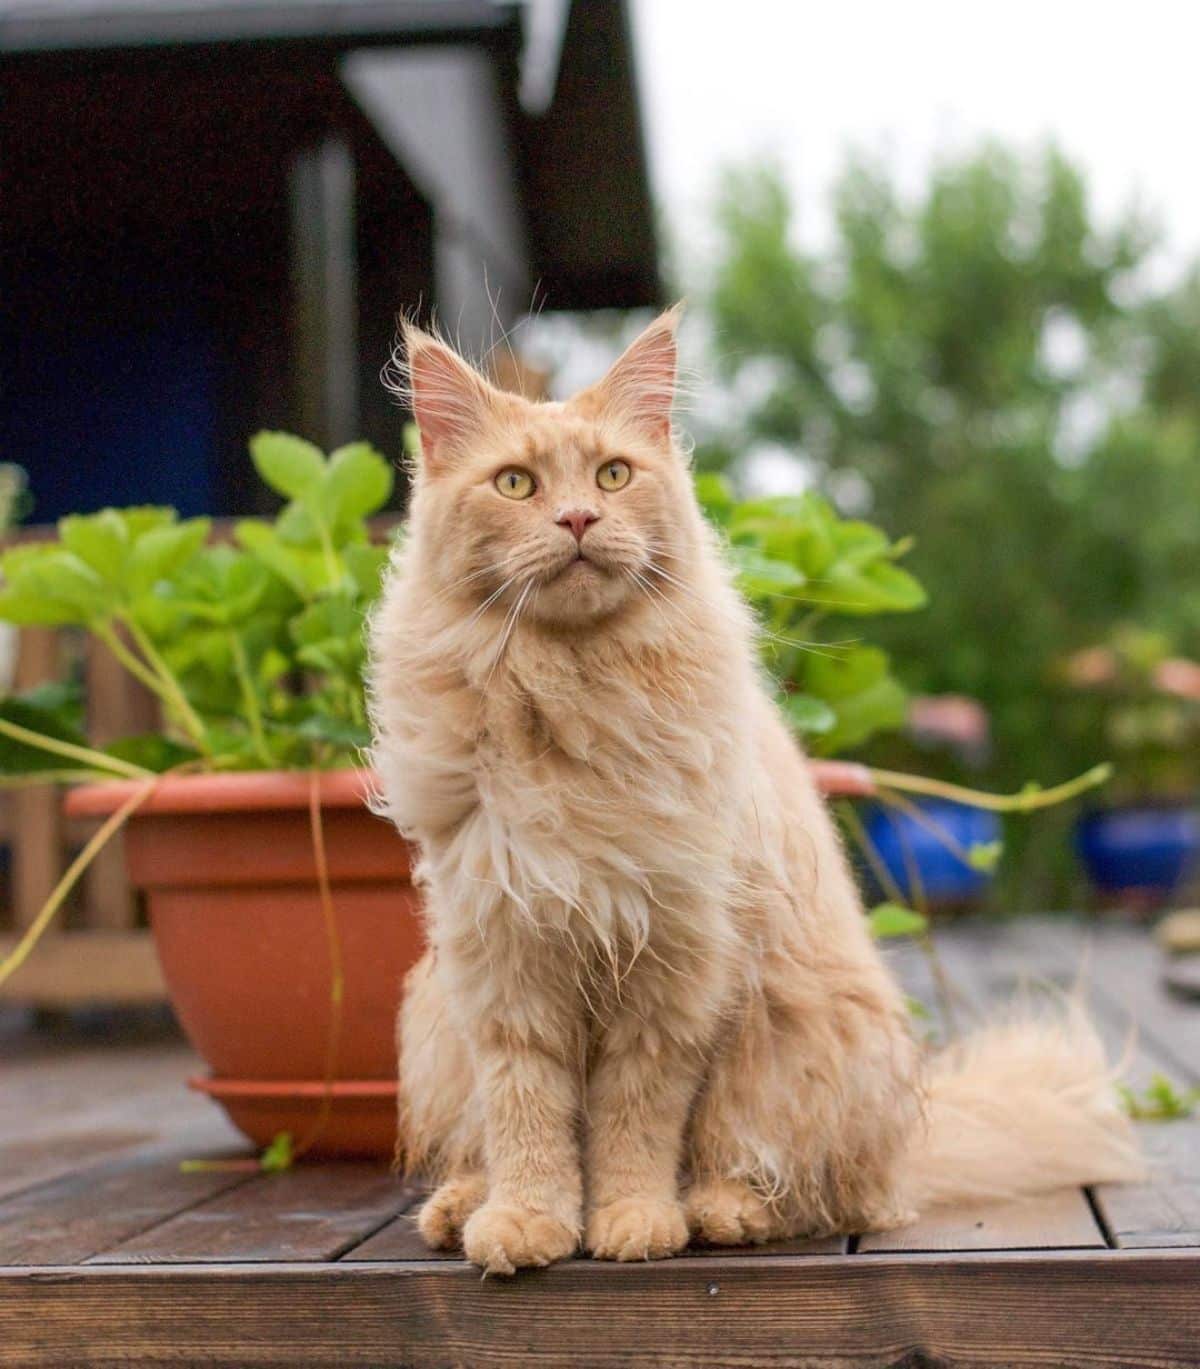 A fluffy orange maine coon cat sitting on a wooden porch.